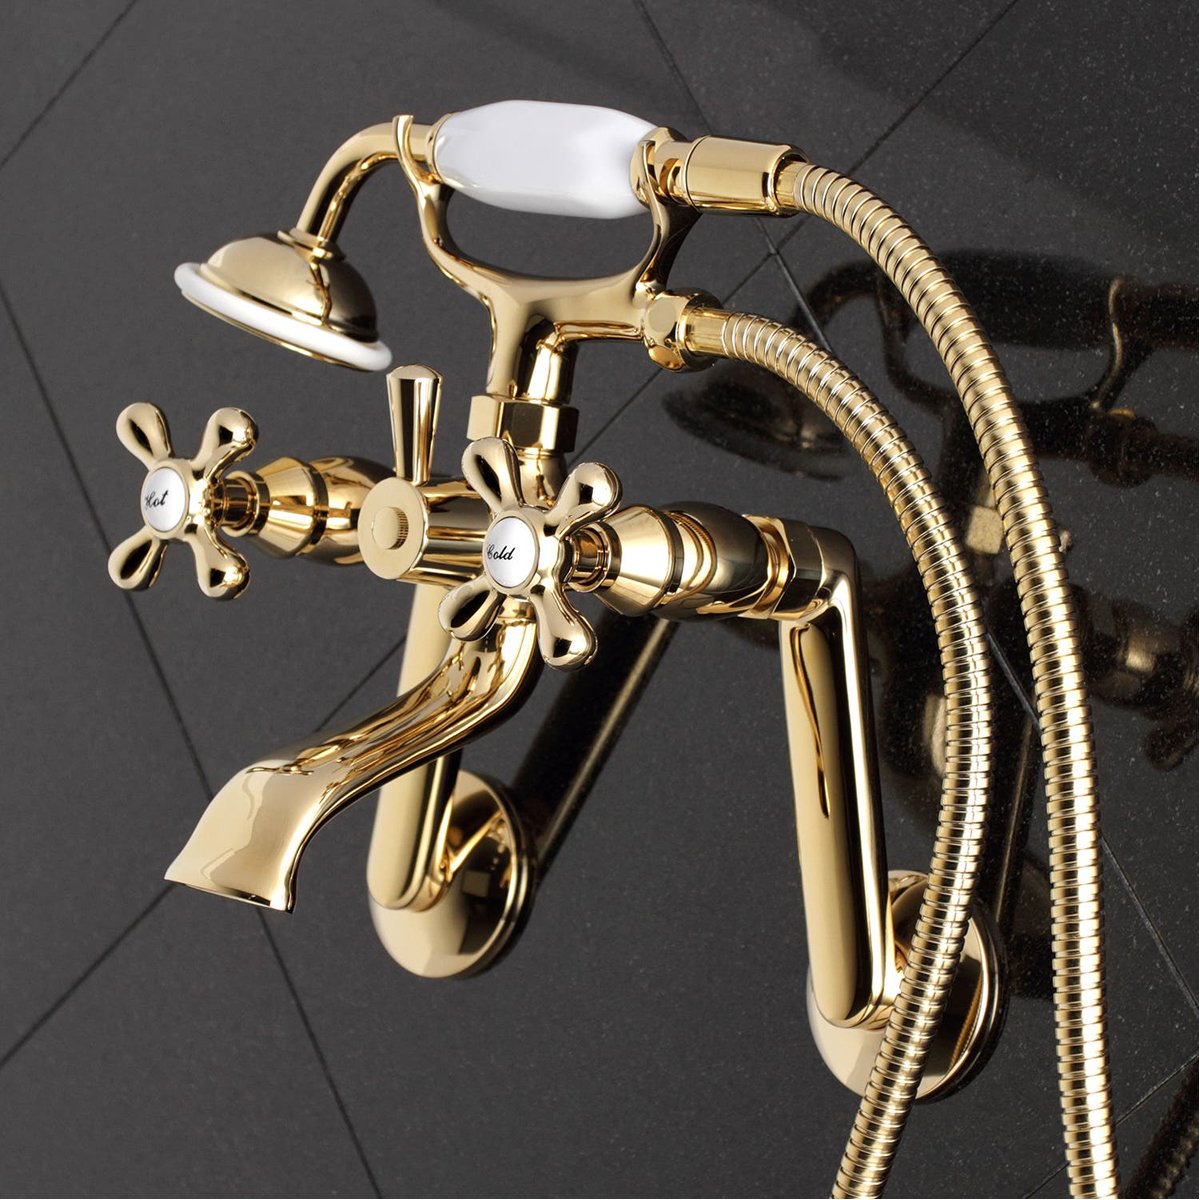 Kingston Brass 2-Hole Tub Wall Mount Clawfoot Tub Faucet with Hand Shower